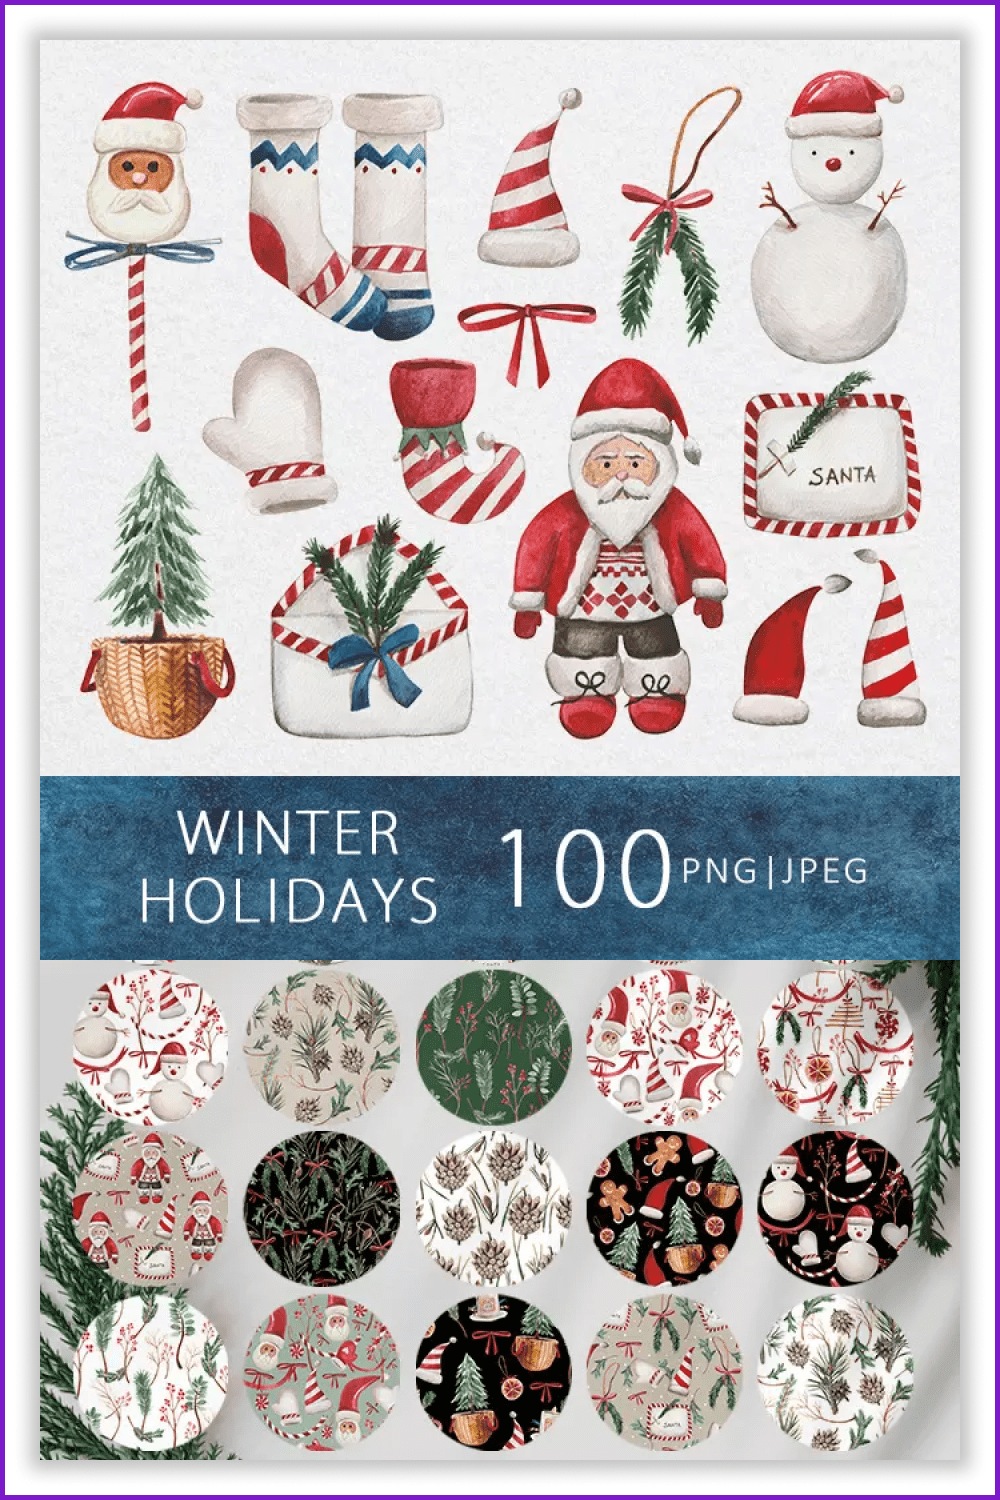 Collage of painted images of Santa Clauses, socks, Christmas trees, snowmen, mittens.